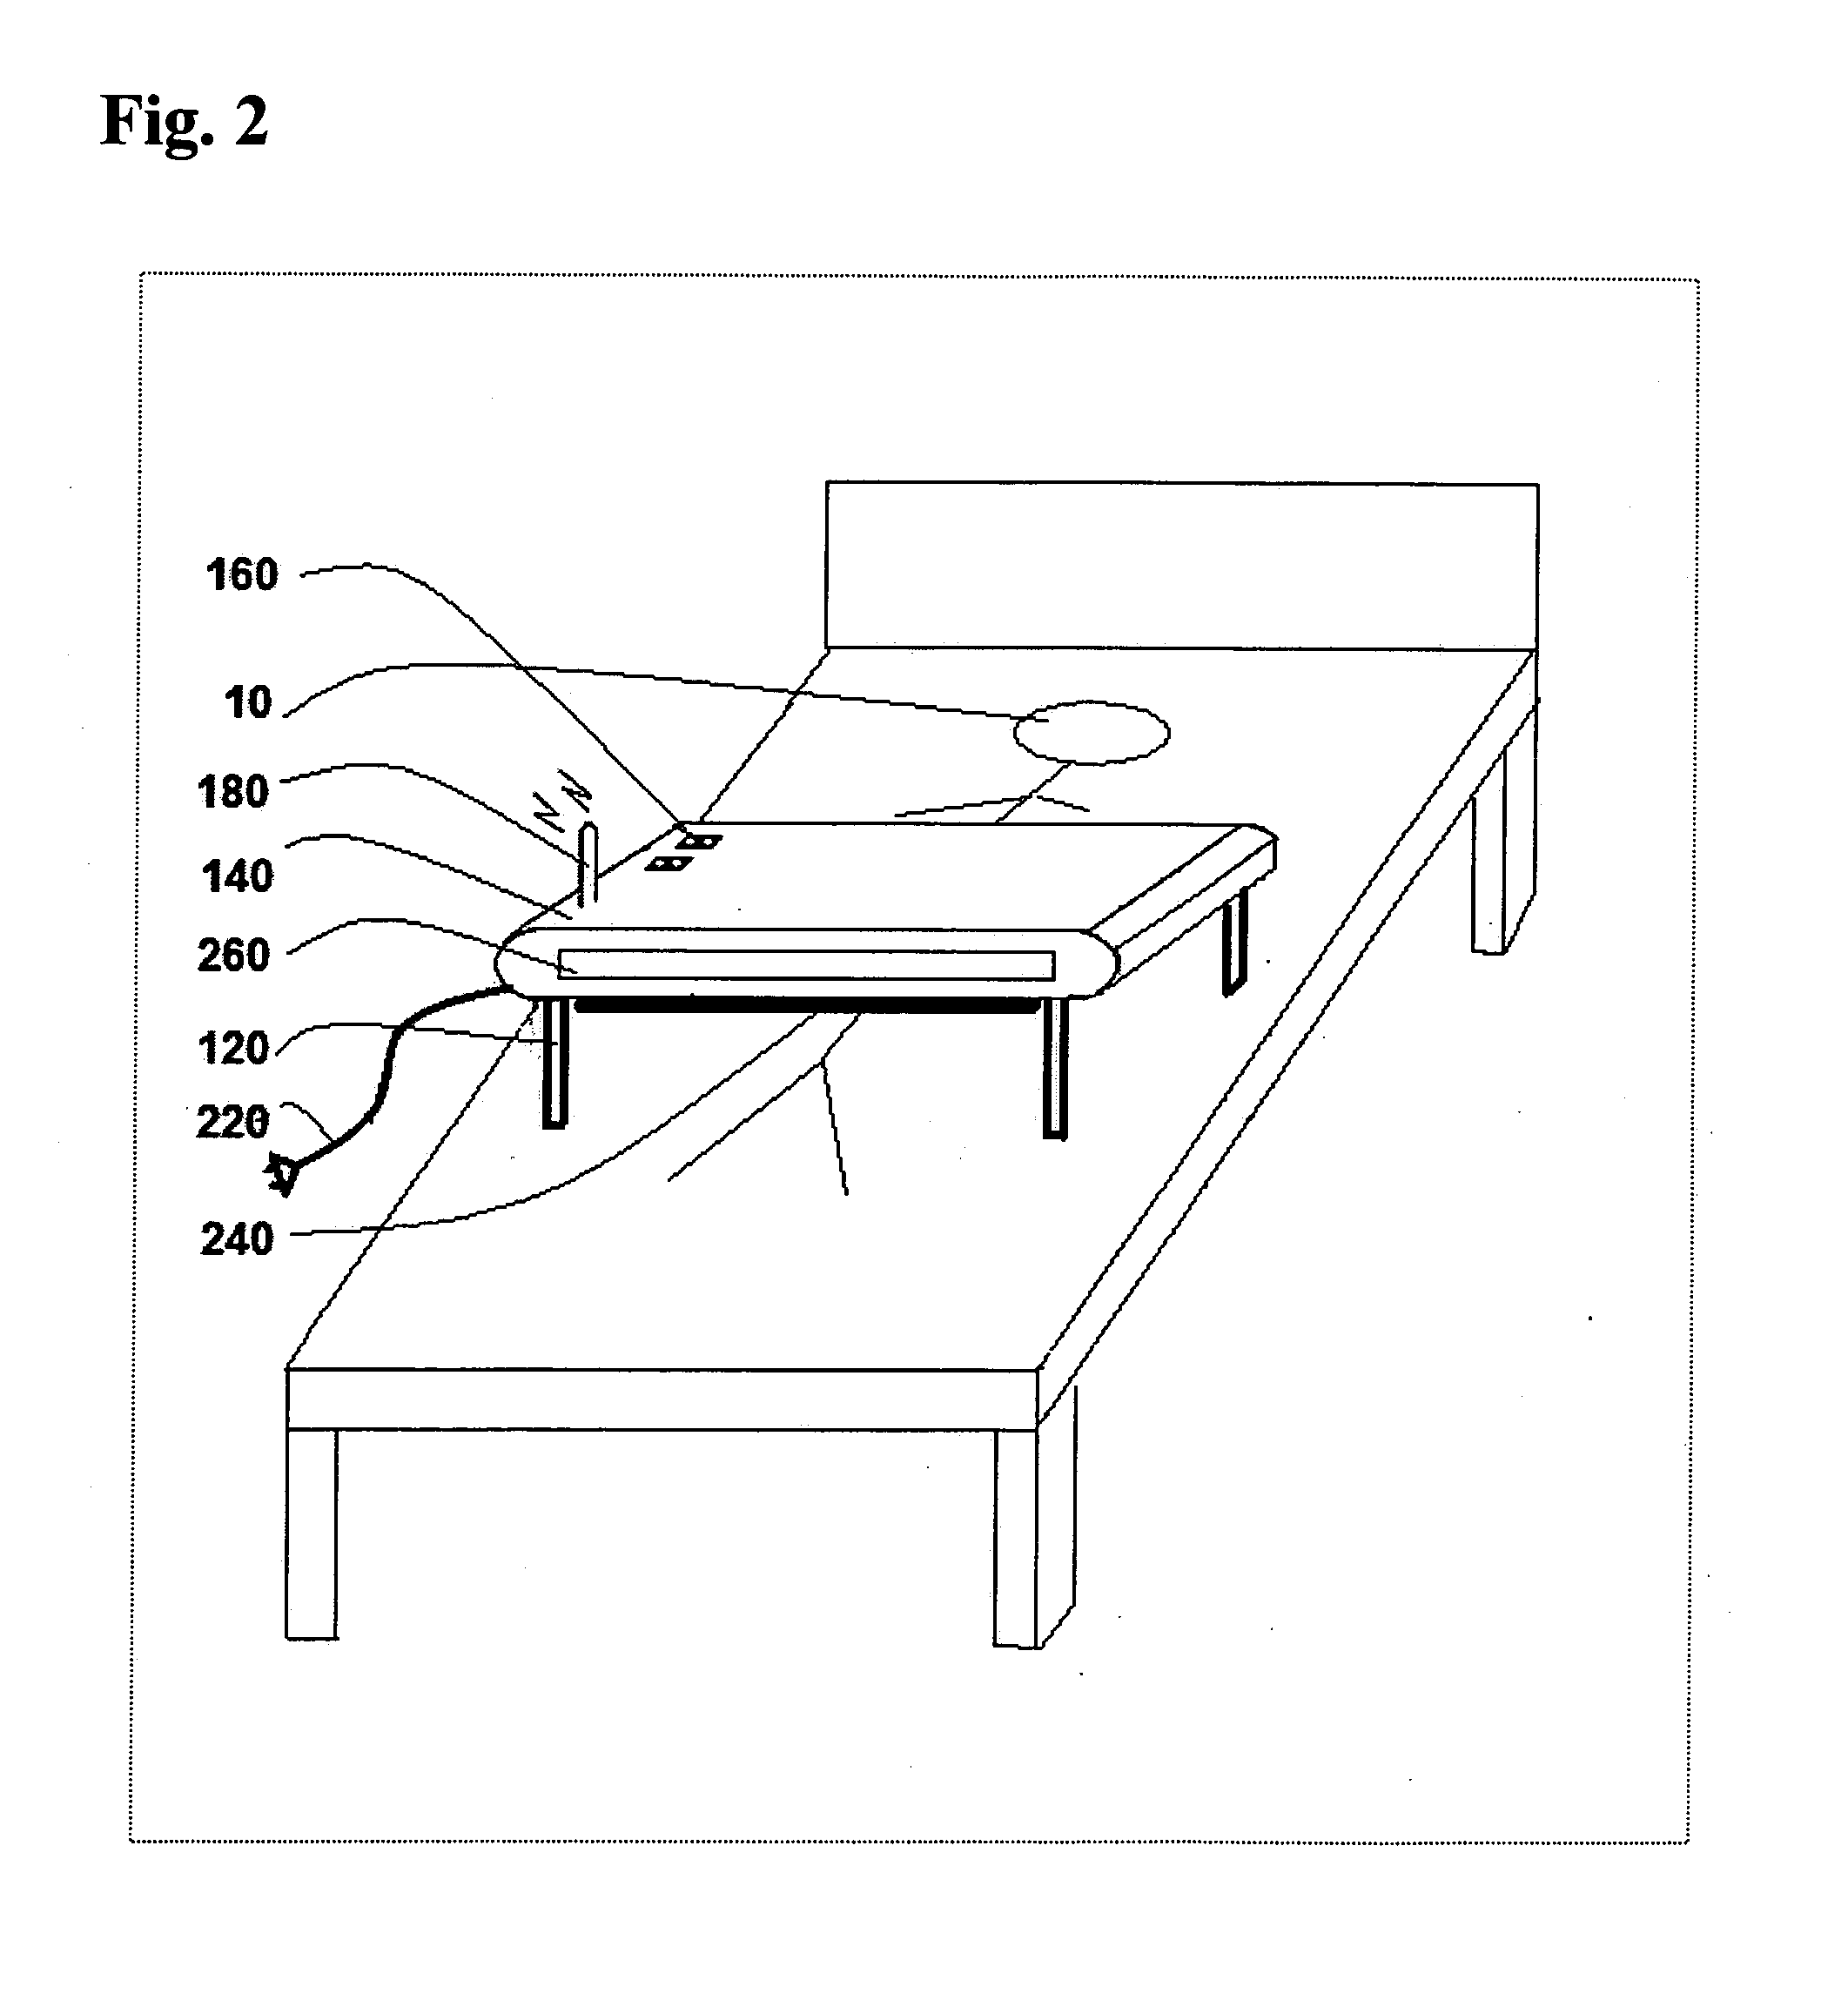 Display support apparatus for wireless operation in inclined or supine position